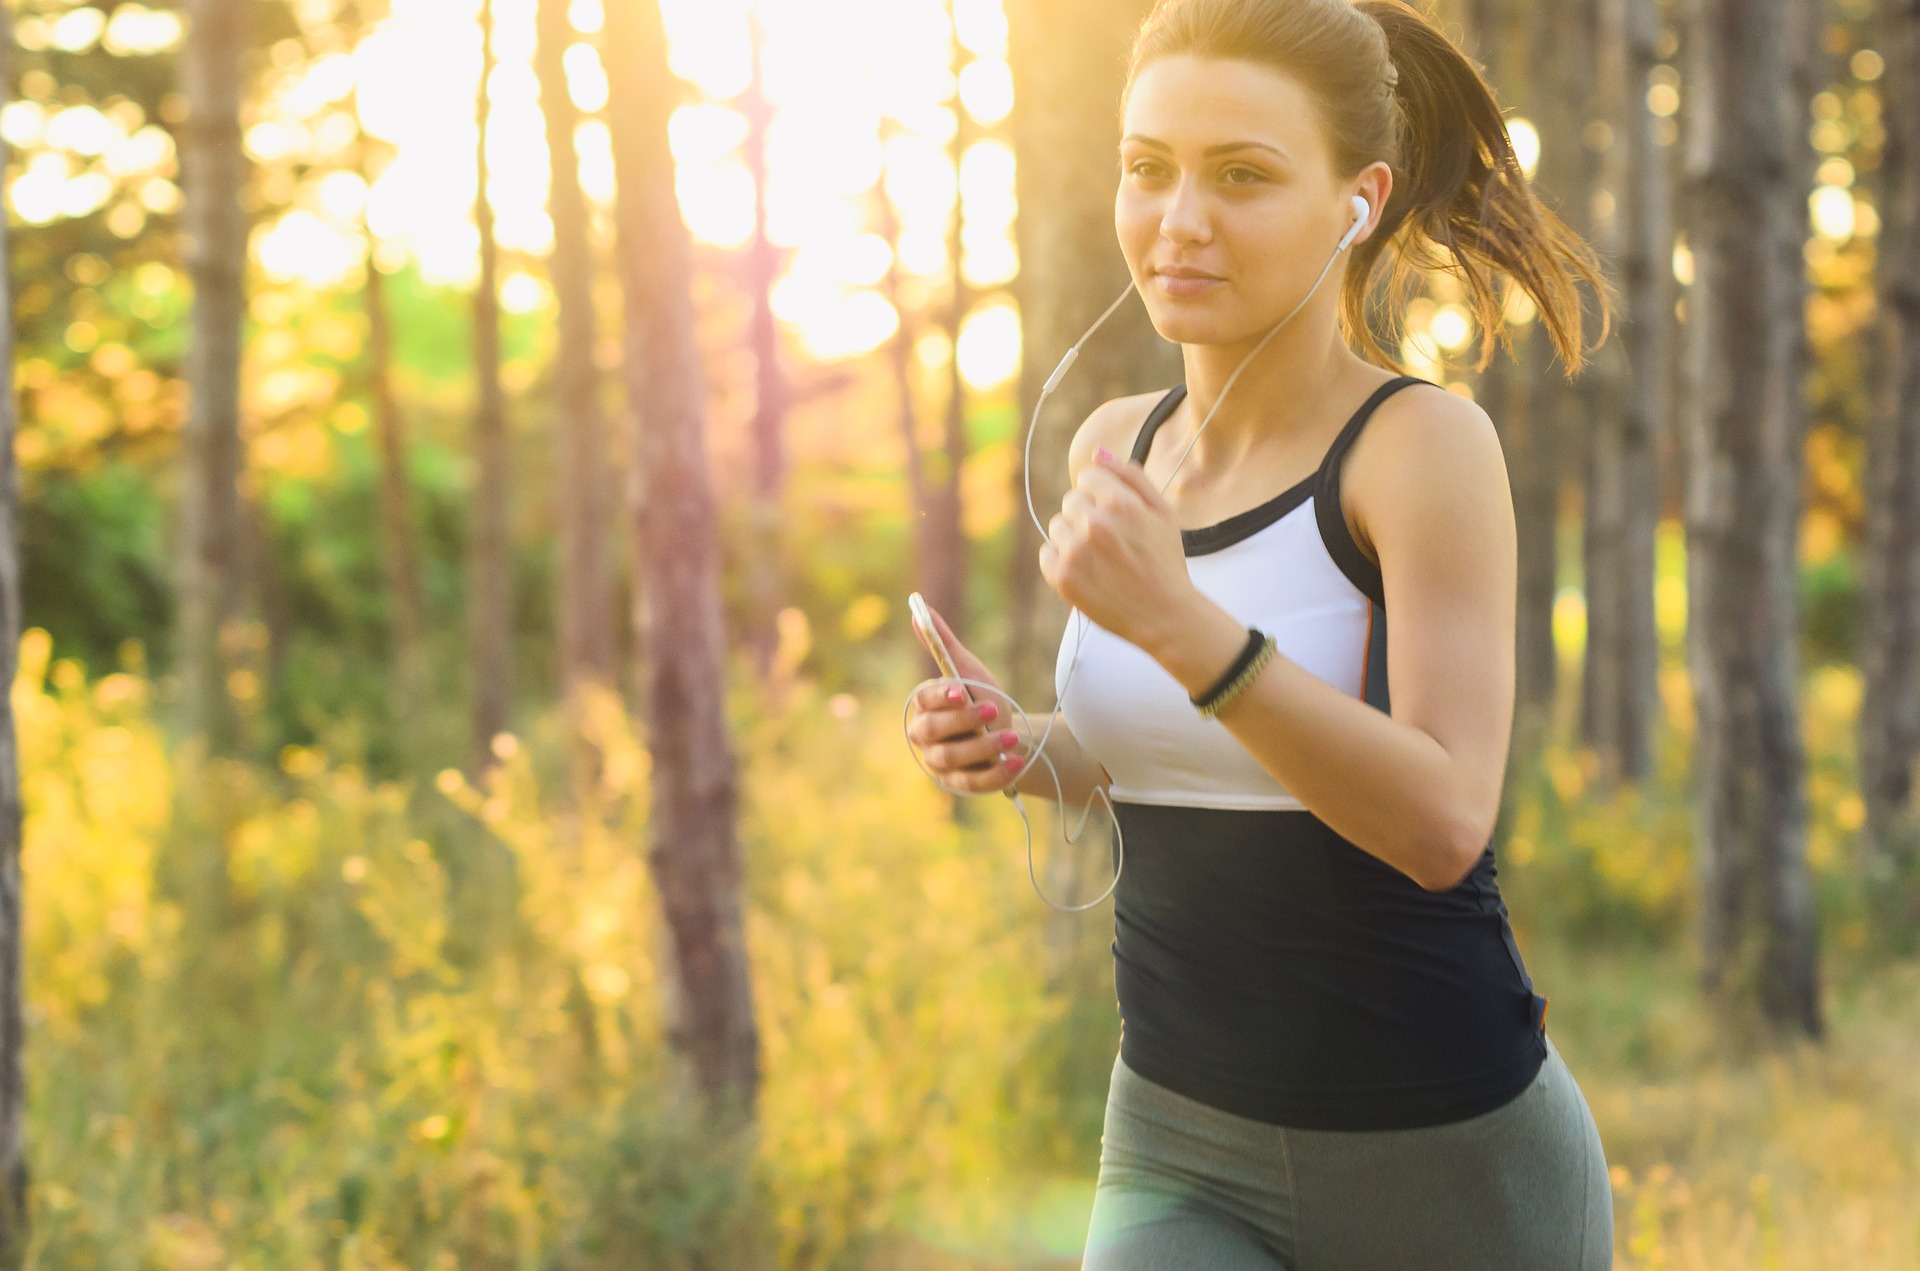 picture of a woman running with earphones